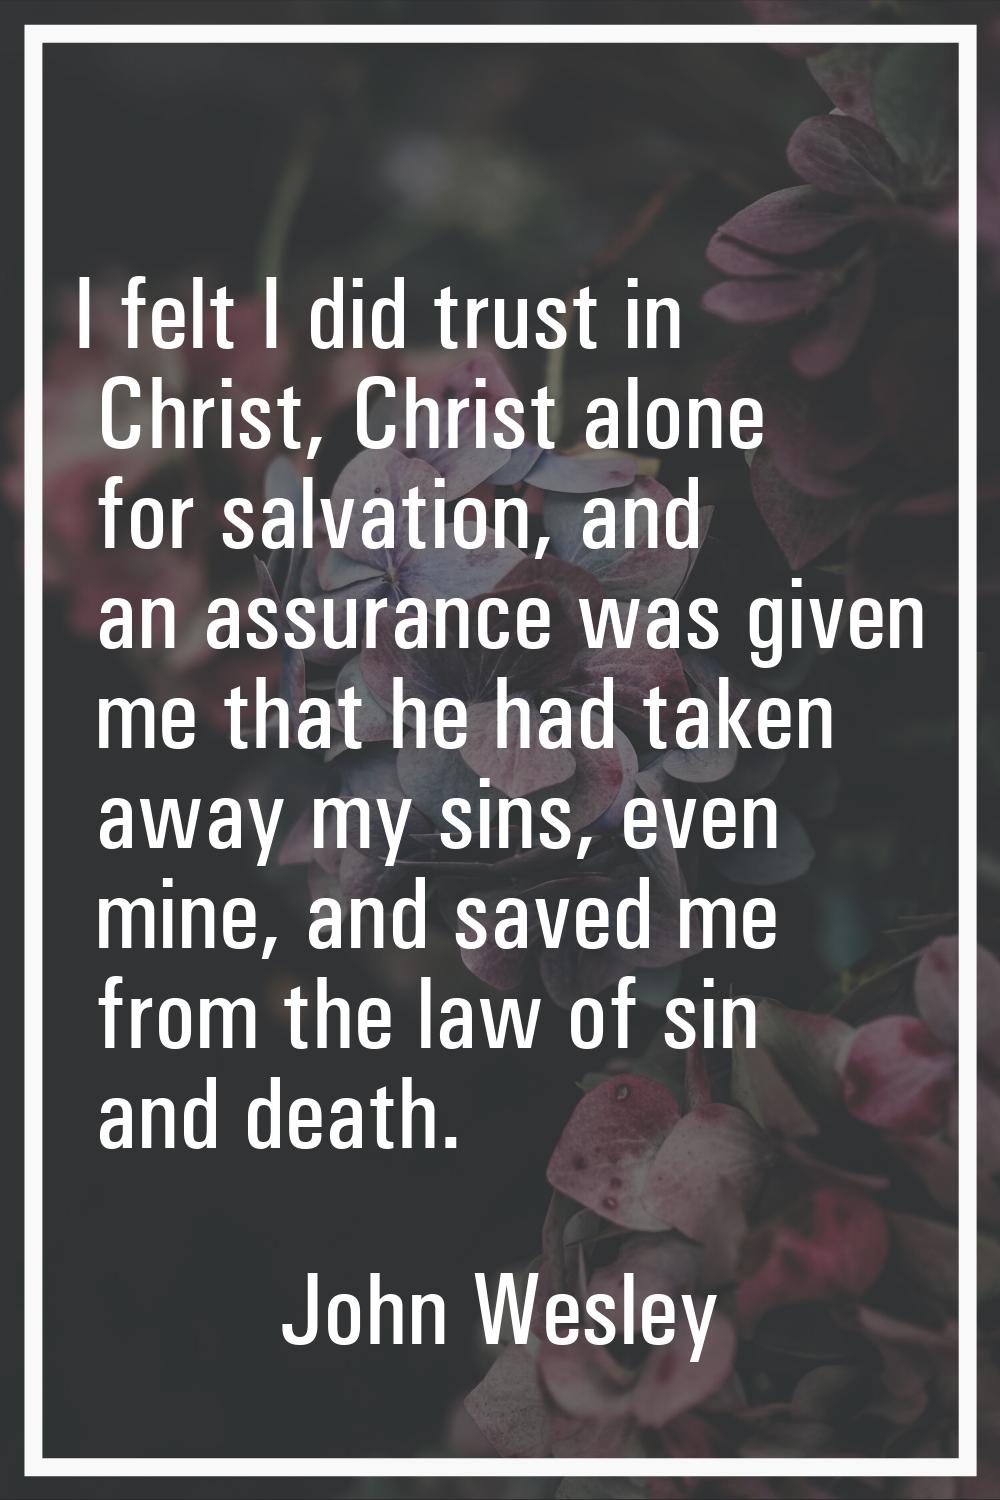 I felt I did trust in Christ, Christ alone for salvation, and an assurance was given me that he had